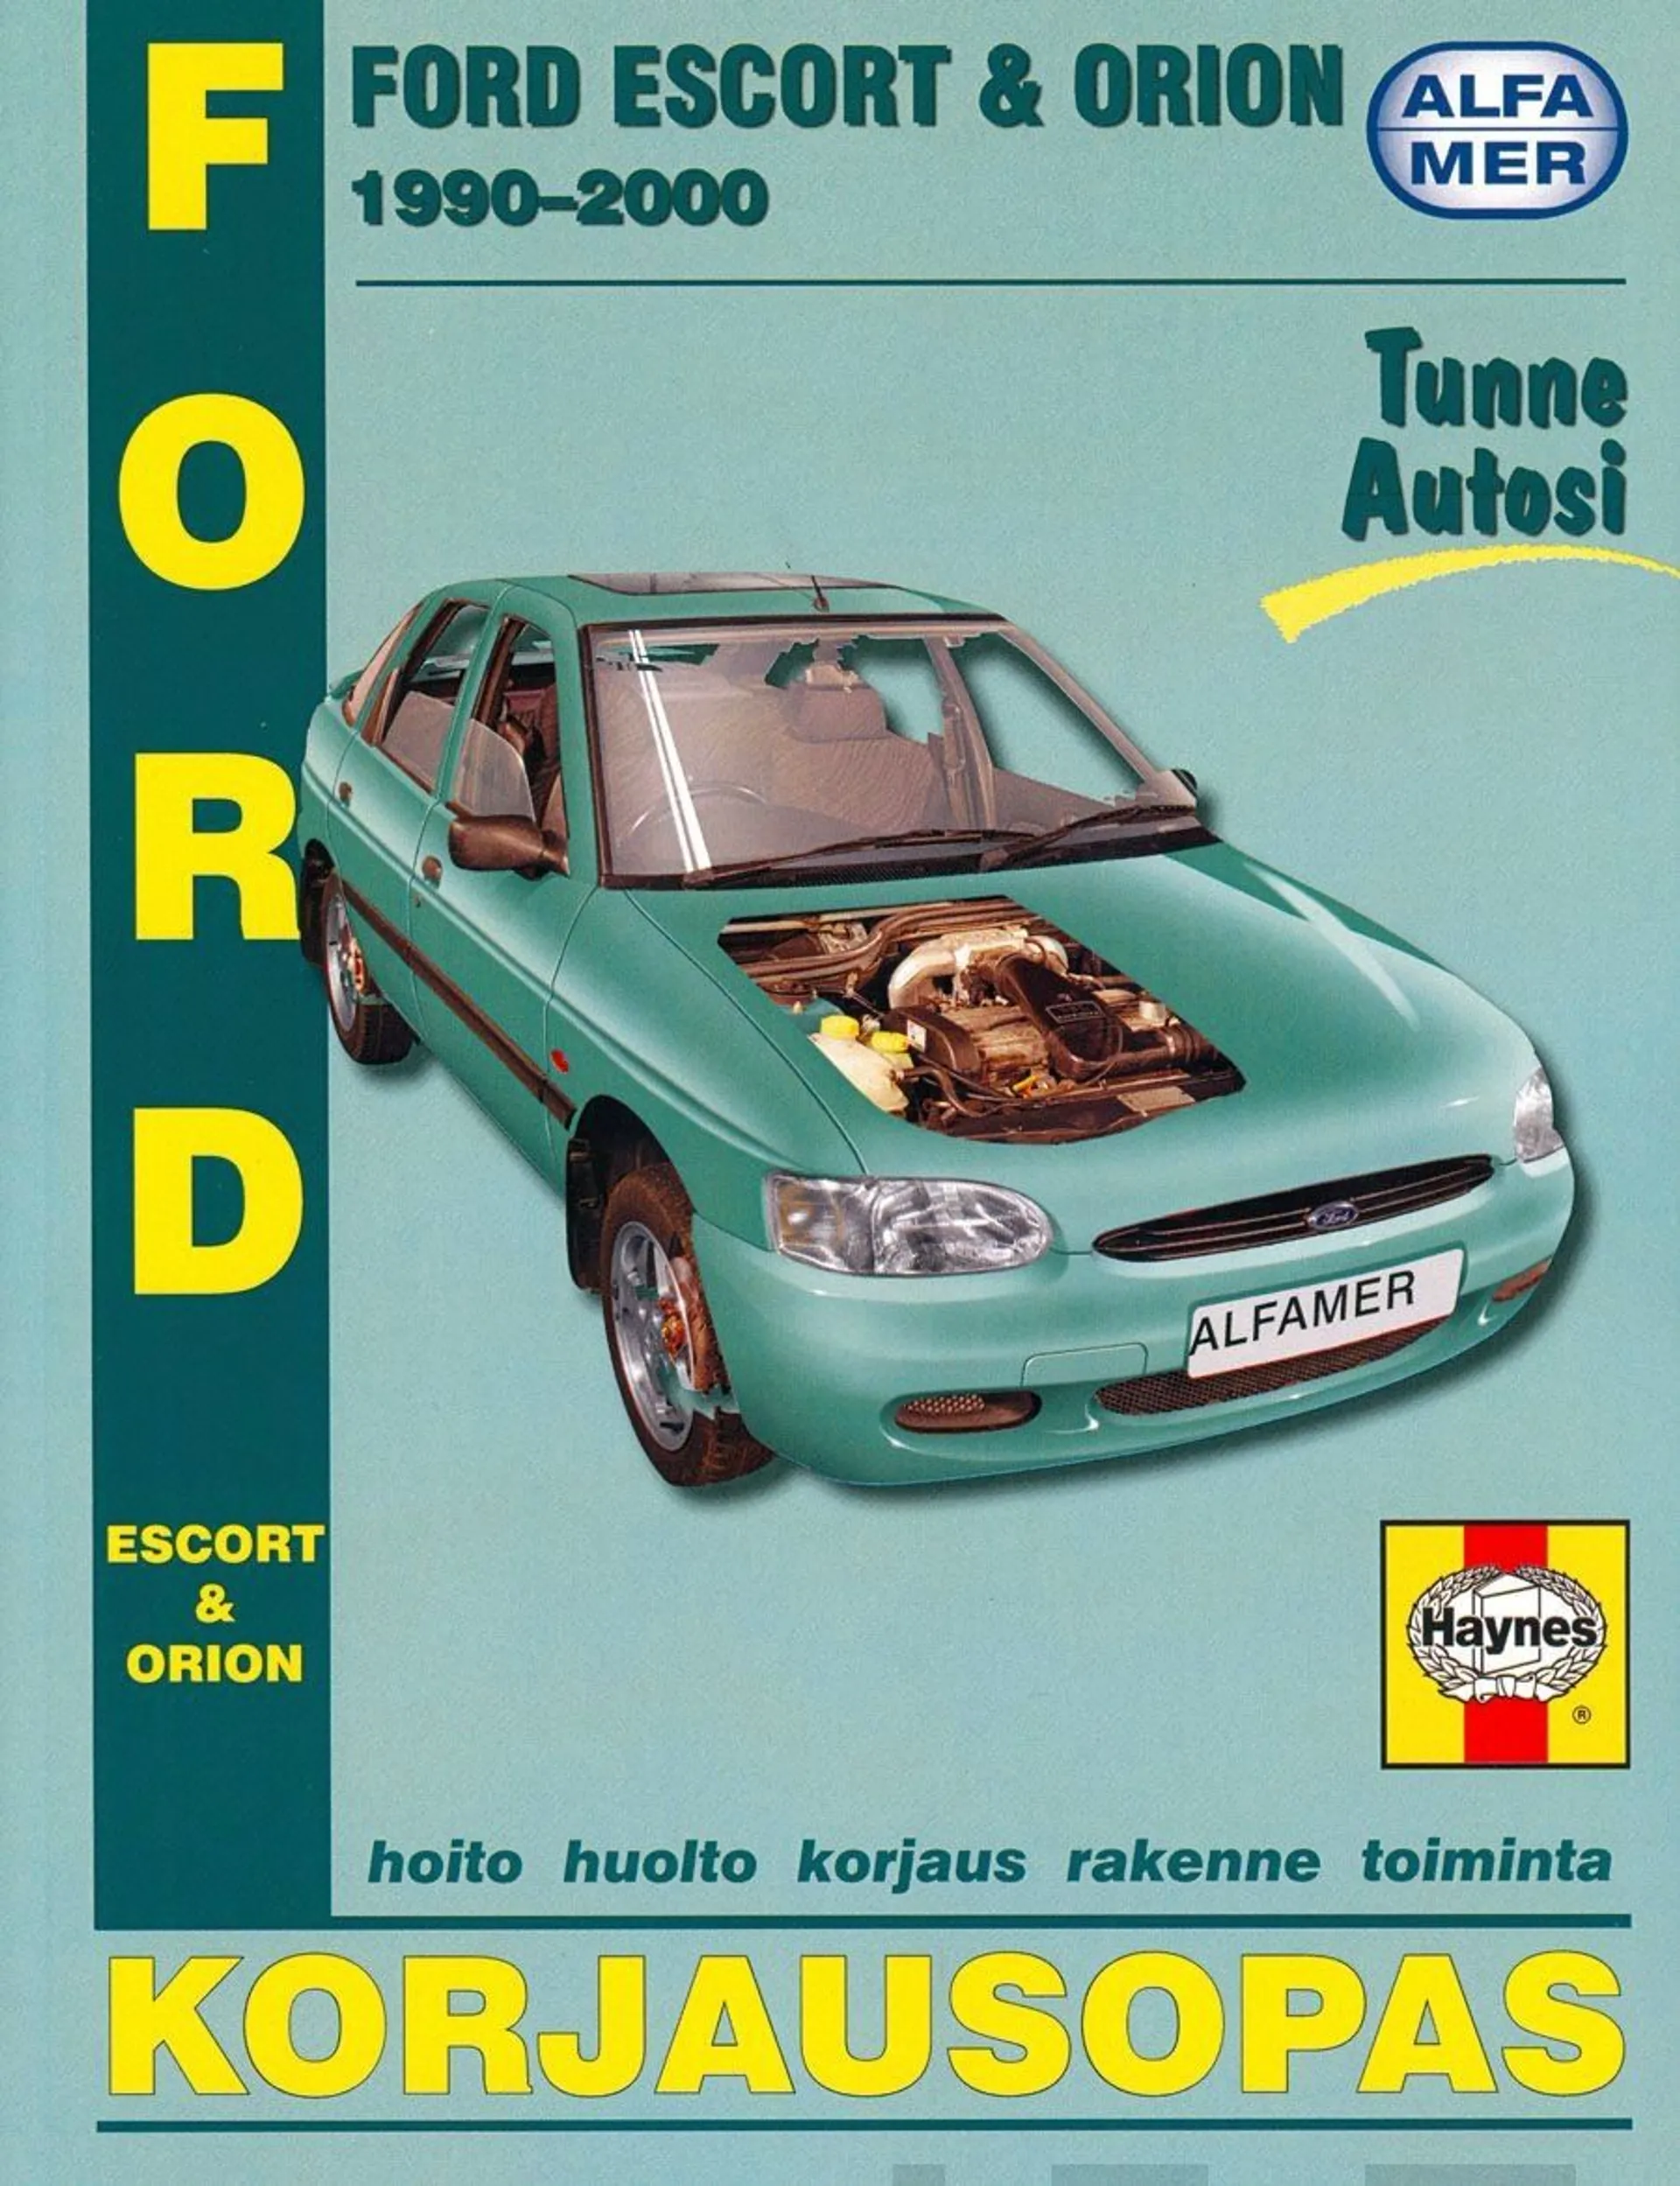 Ford Escort & Orion 1990-2000